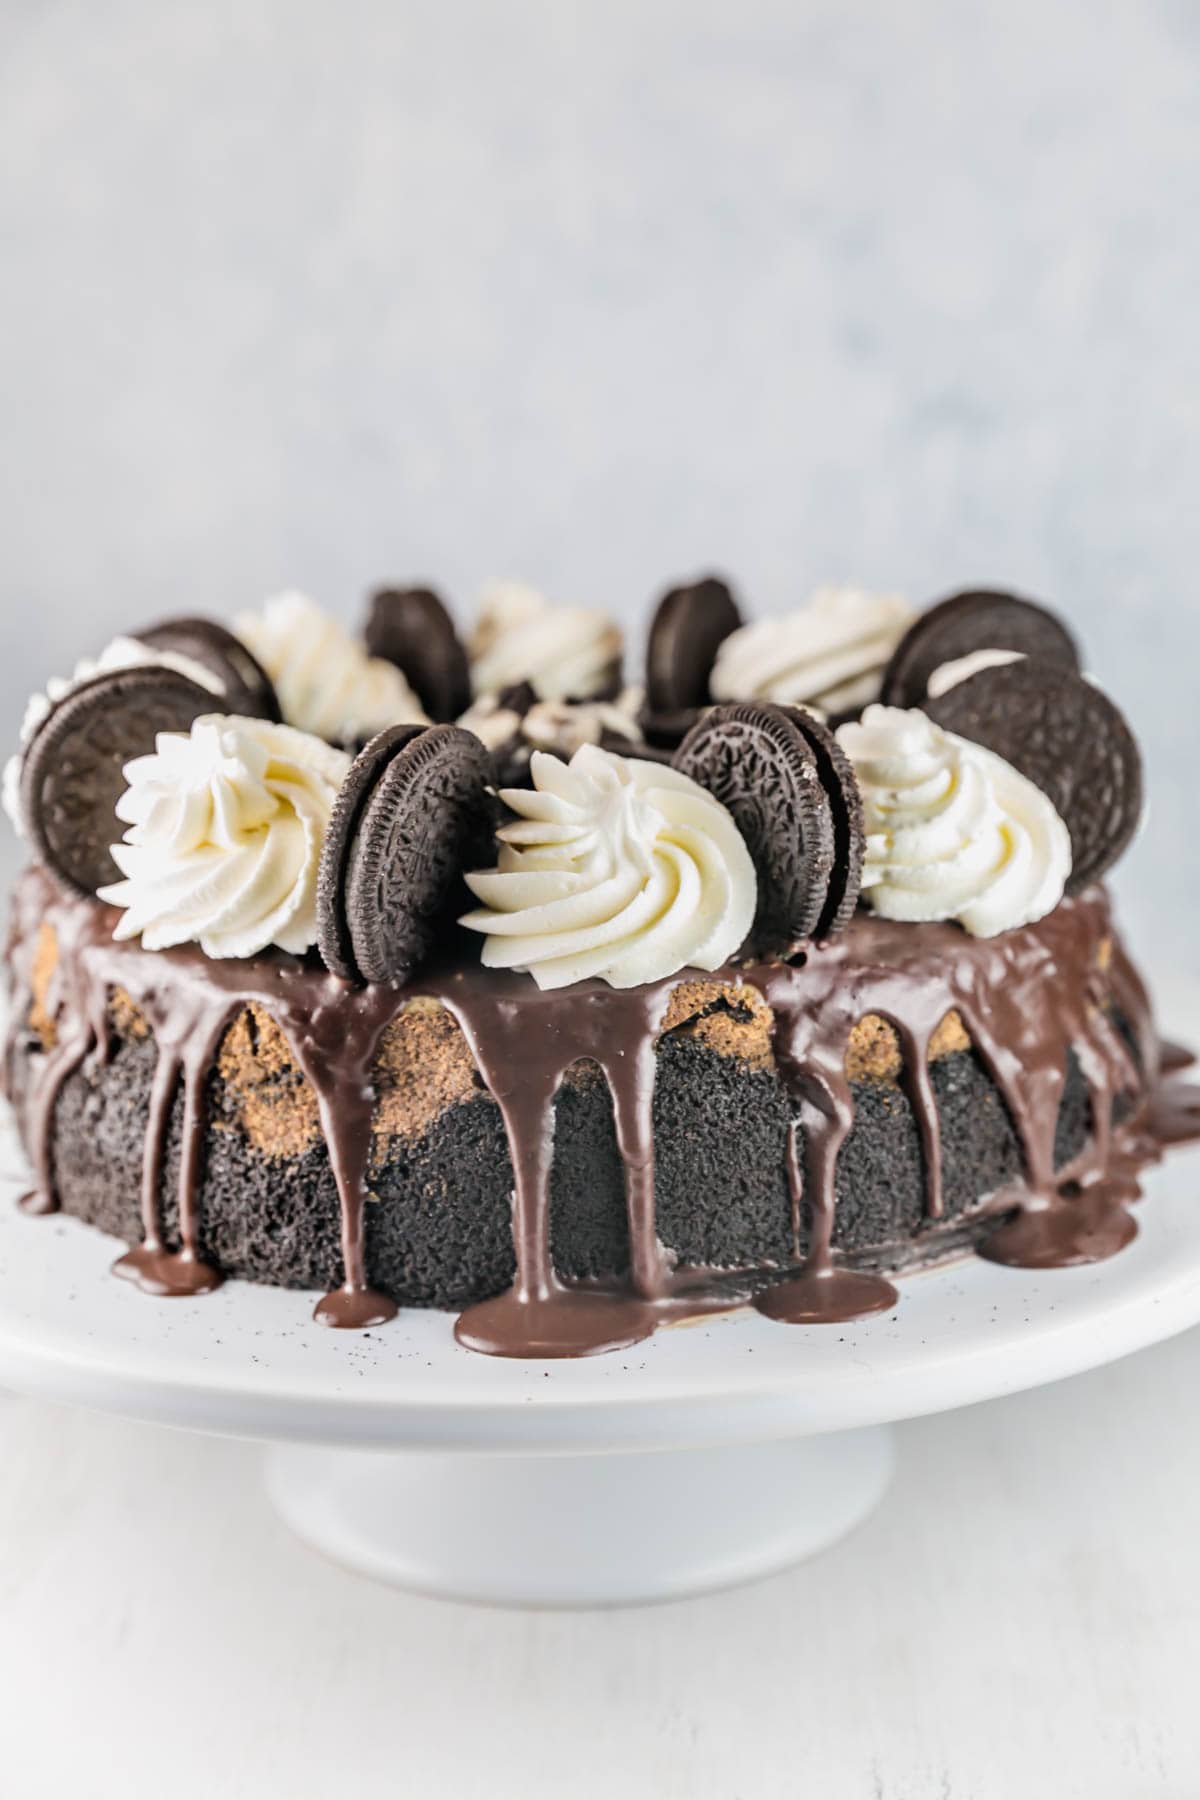 cheesecake decorated with ganache, whipped cream, and oreos